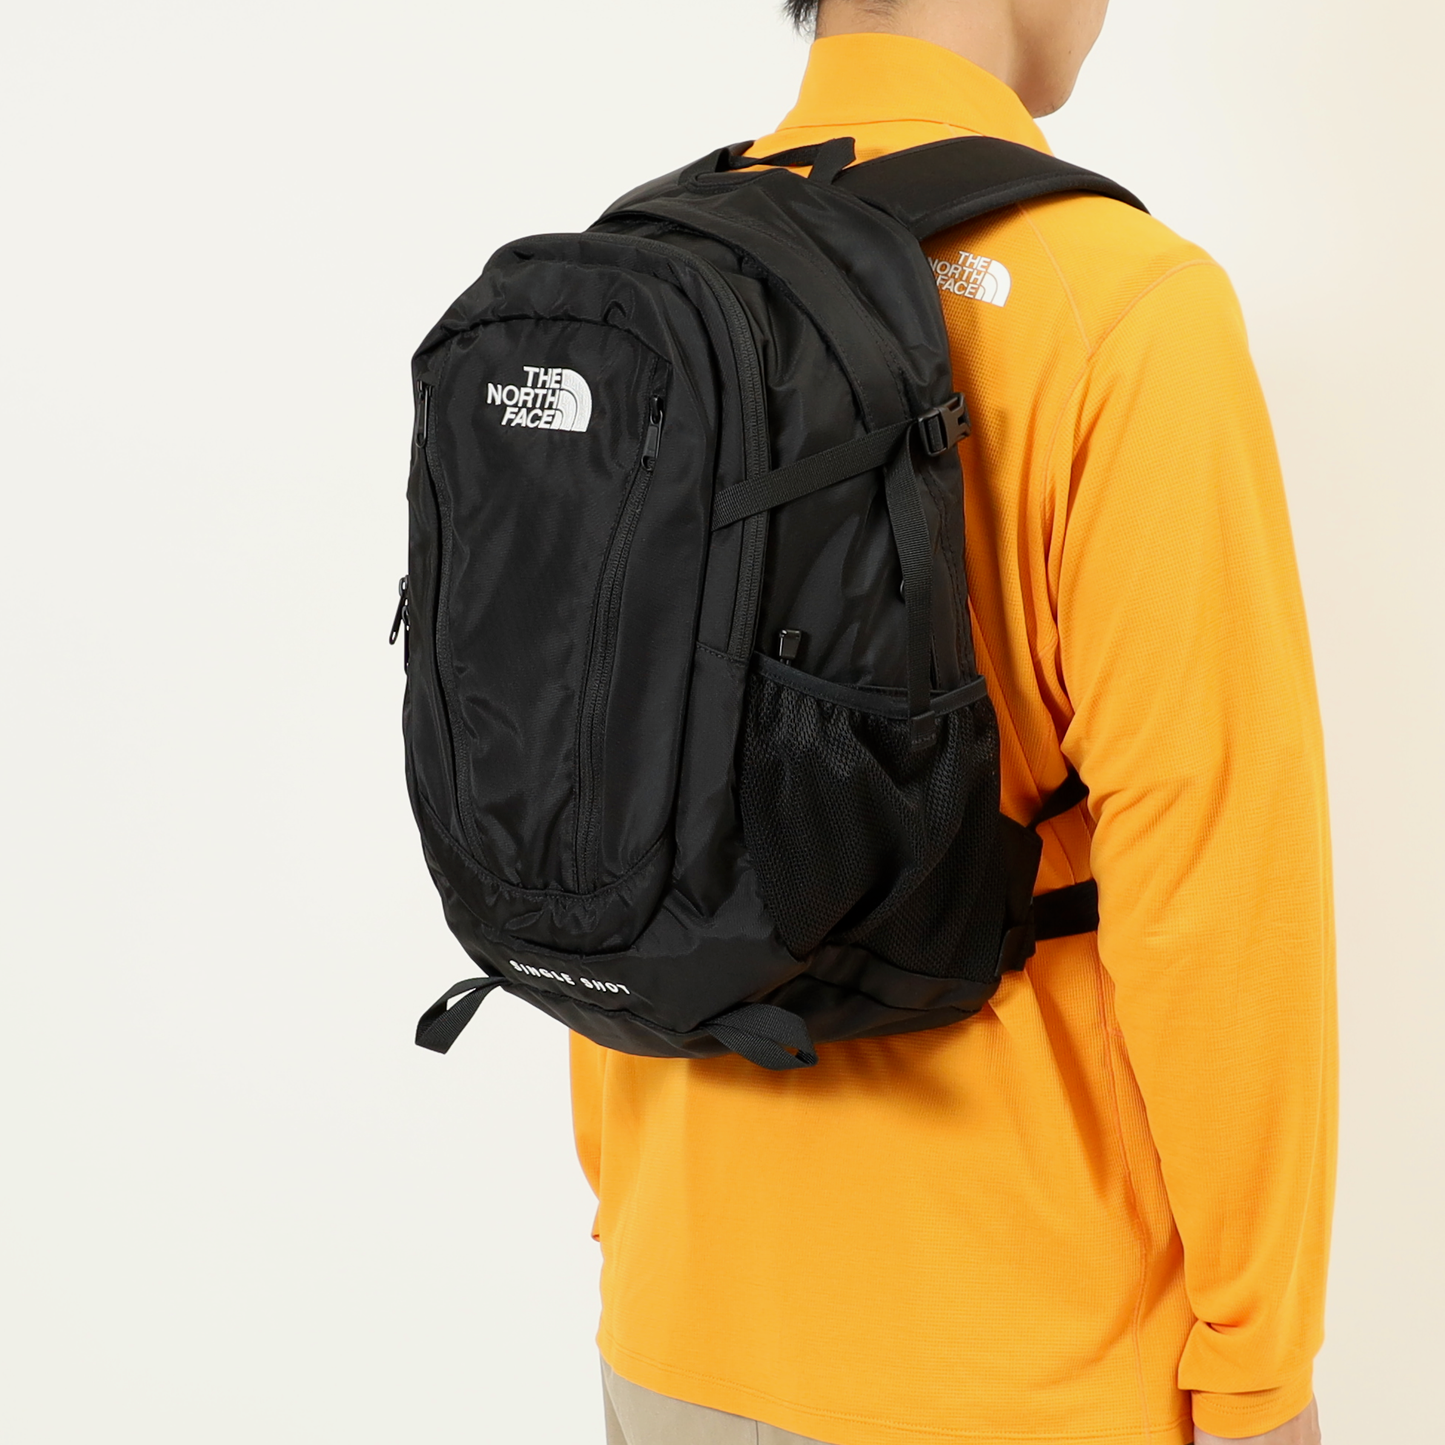 【THE NORTH FACE】Single Shot